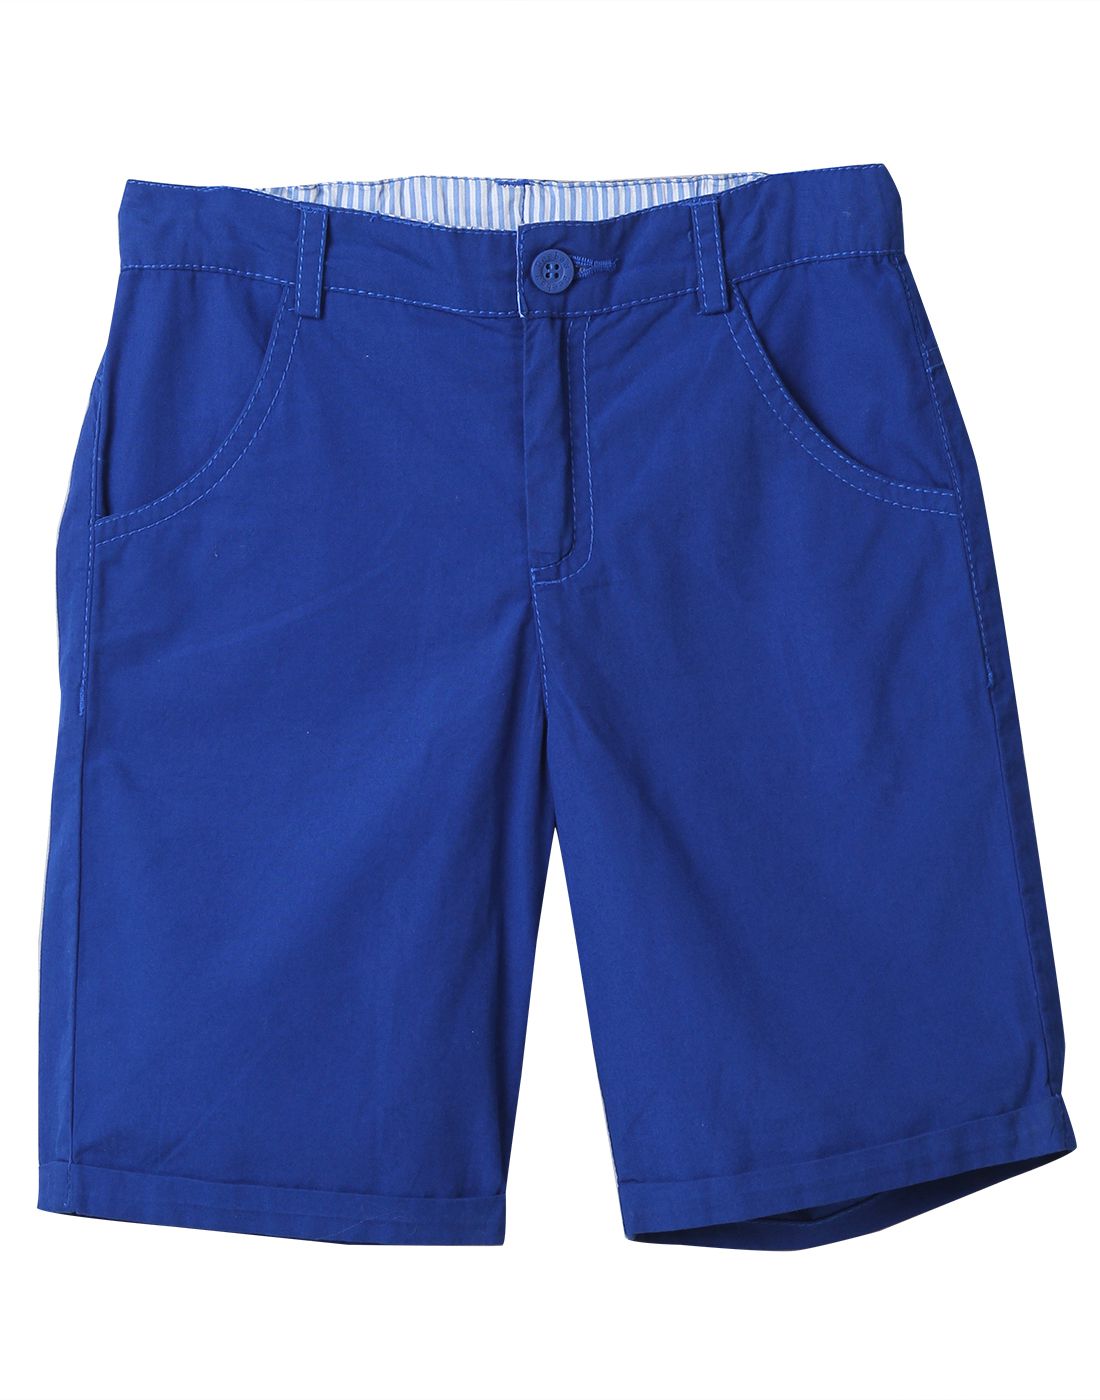 Beebay Blue Cotton Shorts - Buy Beebay Blue Cotton Shorts Online at Low ...